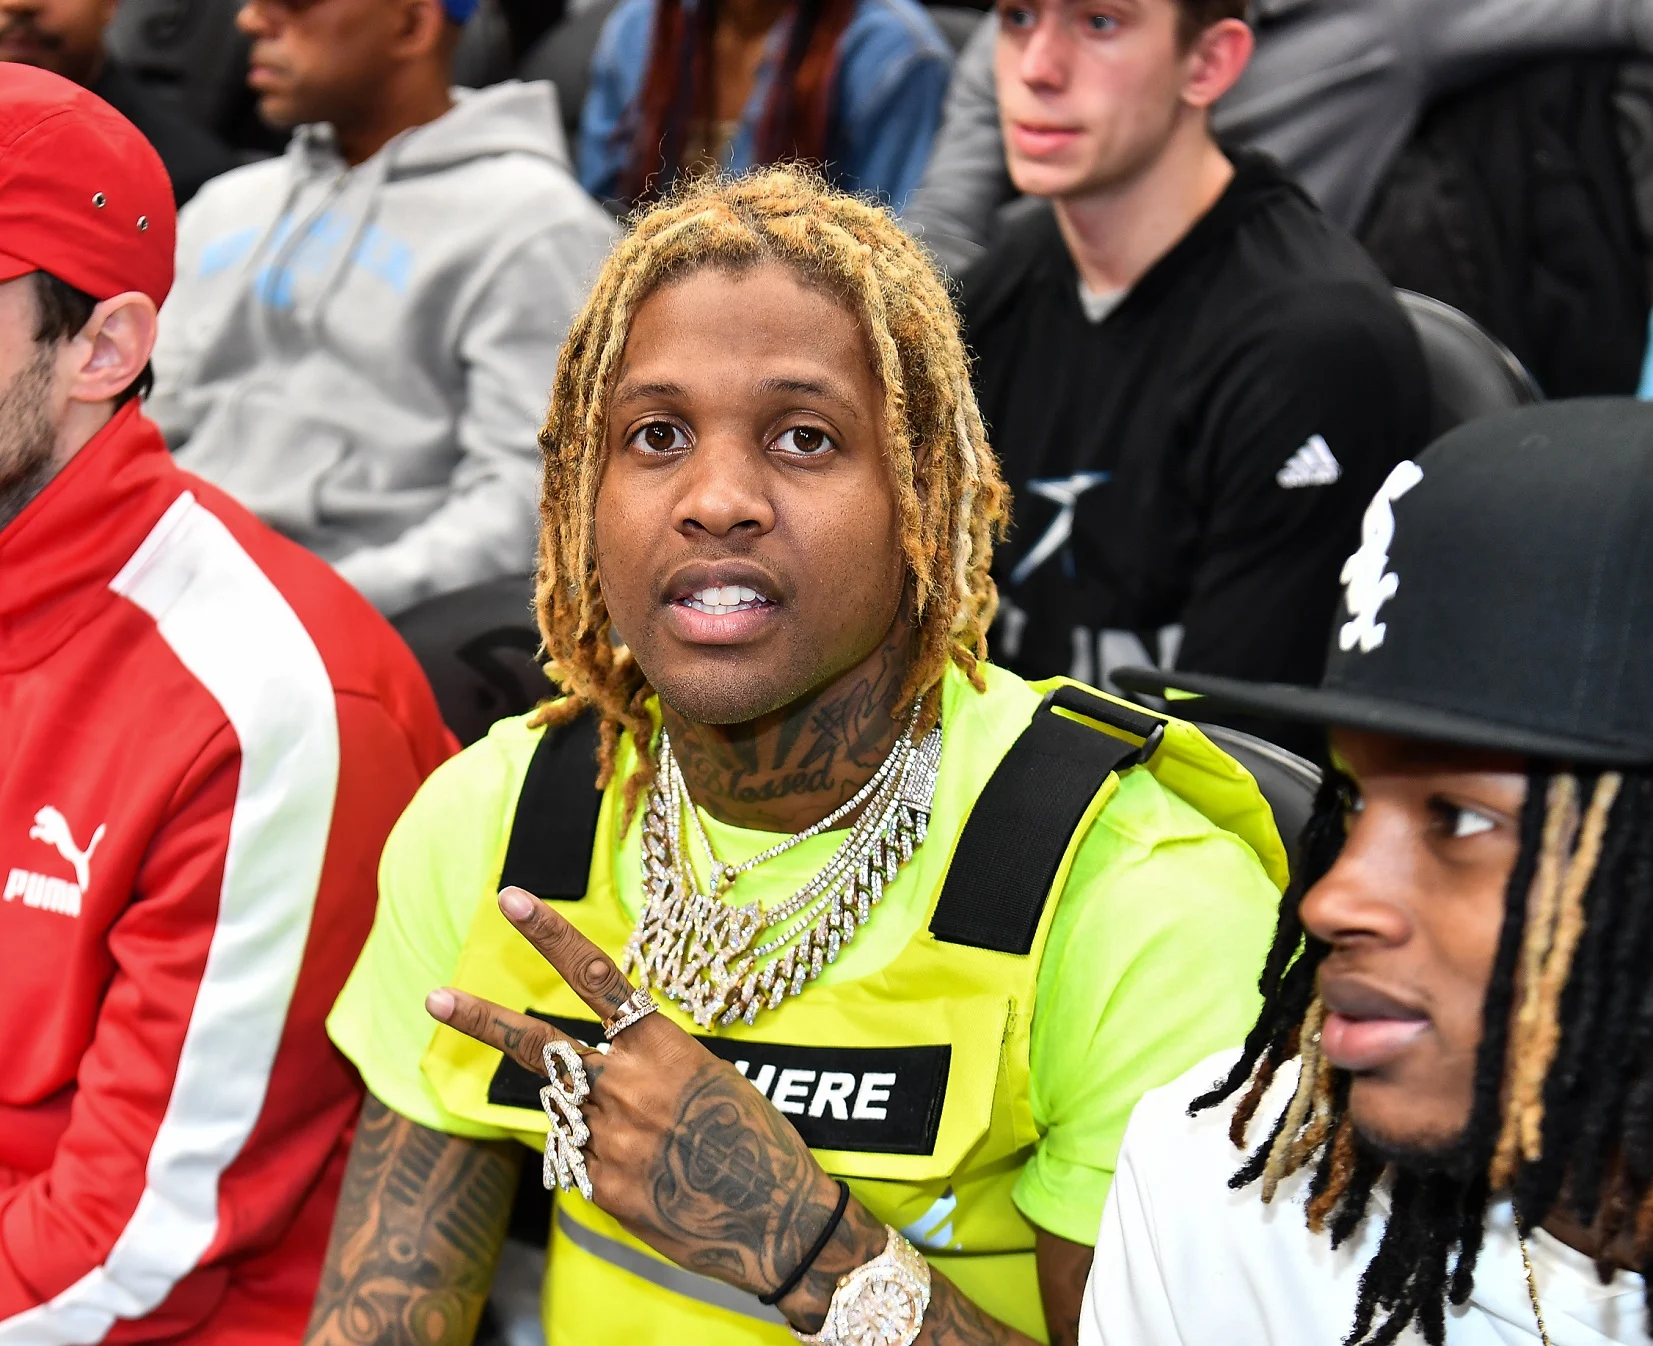 Lil Durk Quotes About Life